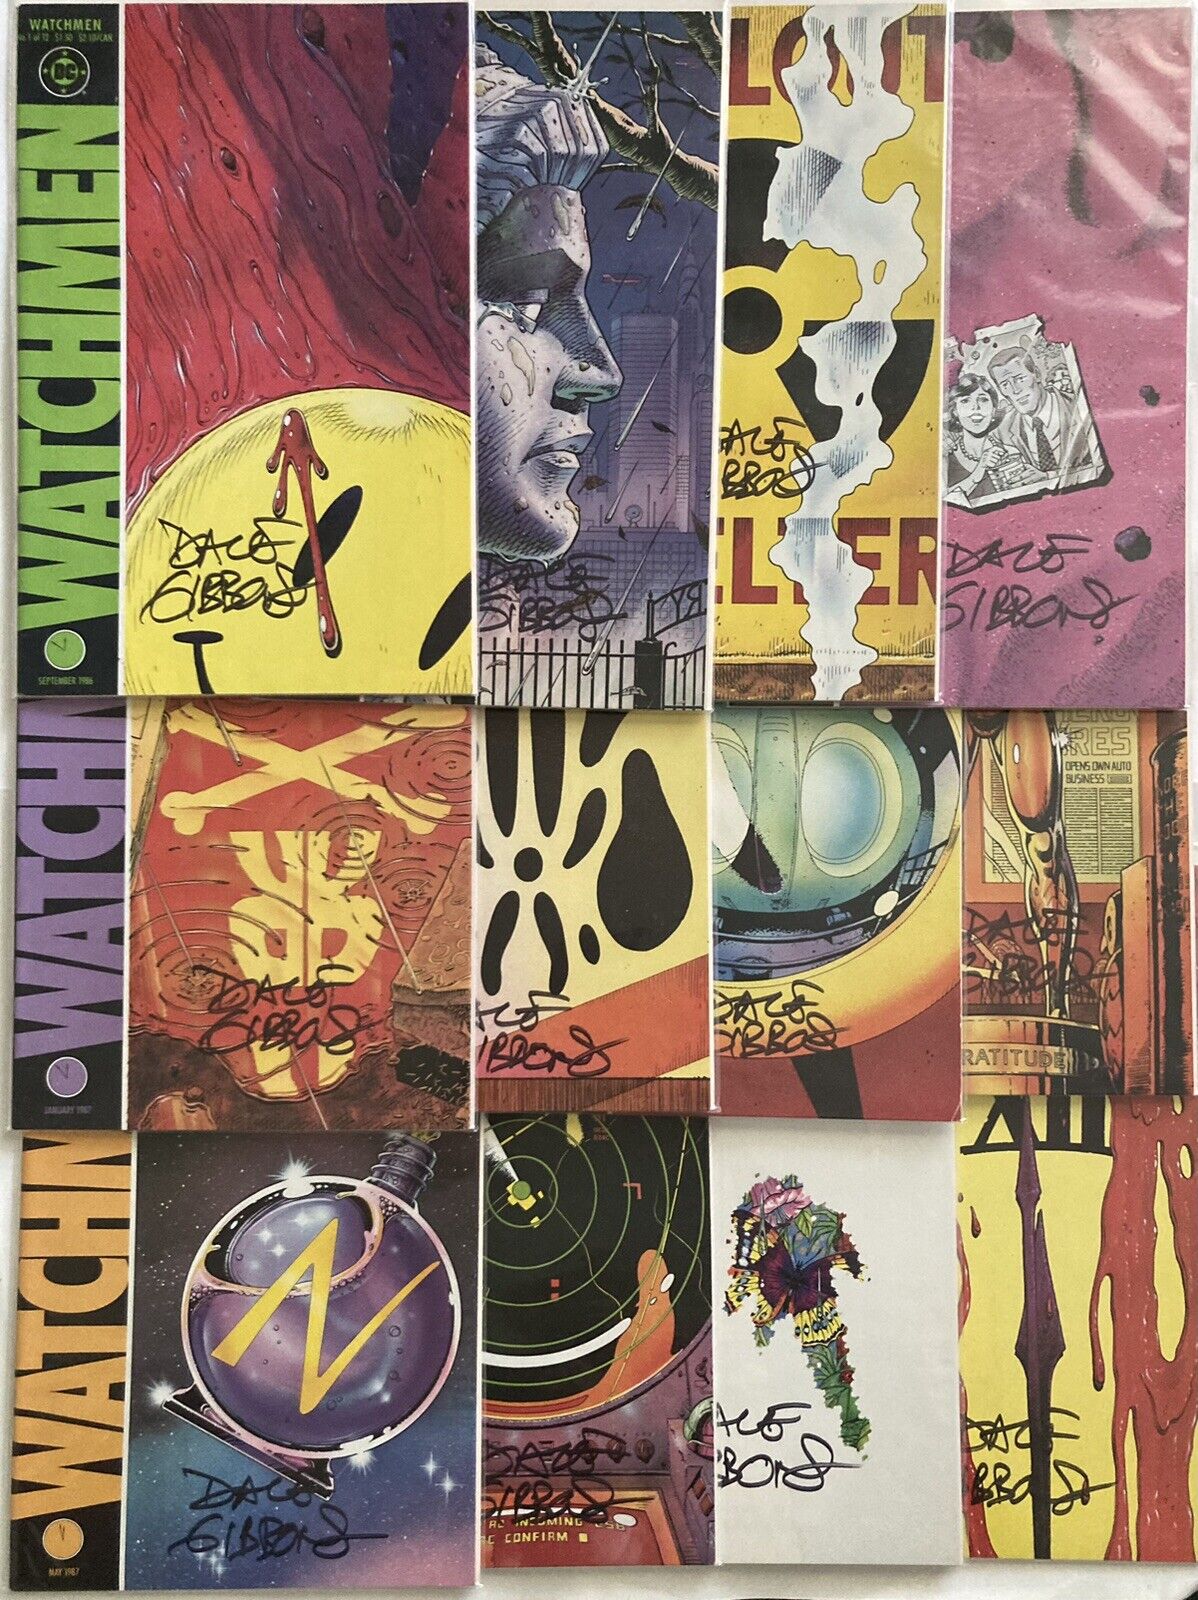 WATCHMEN #1-12 COMPLETE SET 1986 (Signed by Dave Gibbons) EXCELLENT CONDITION